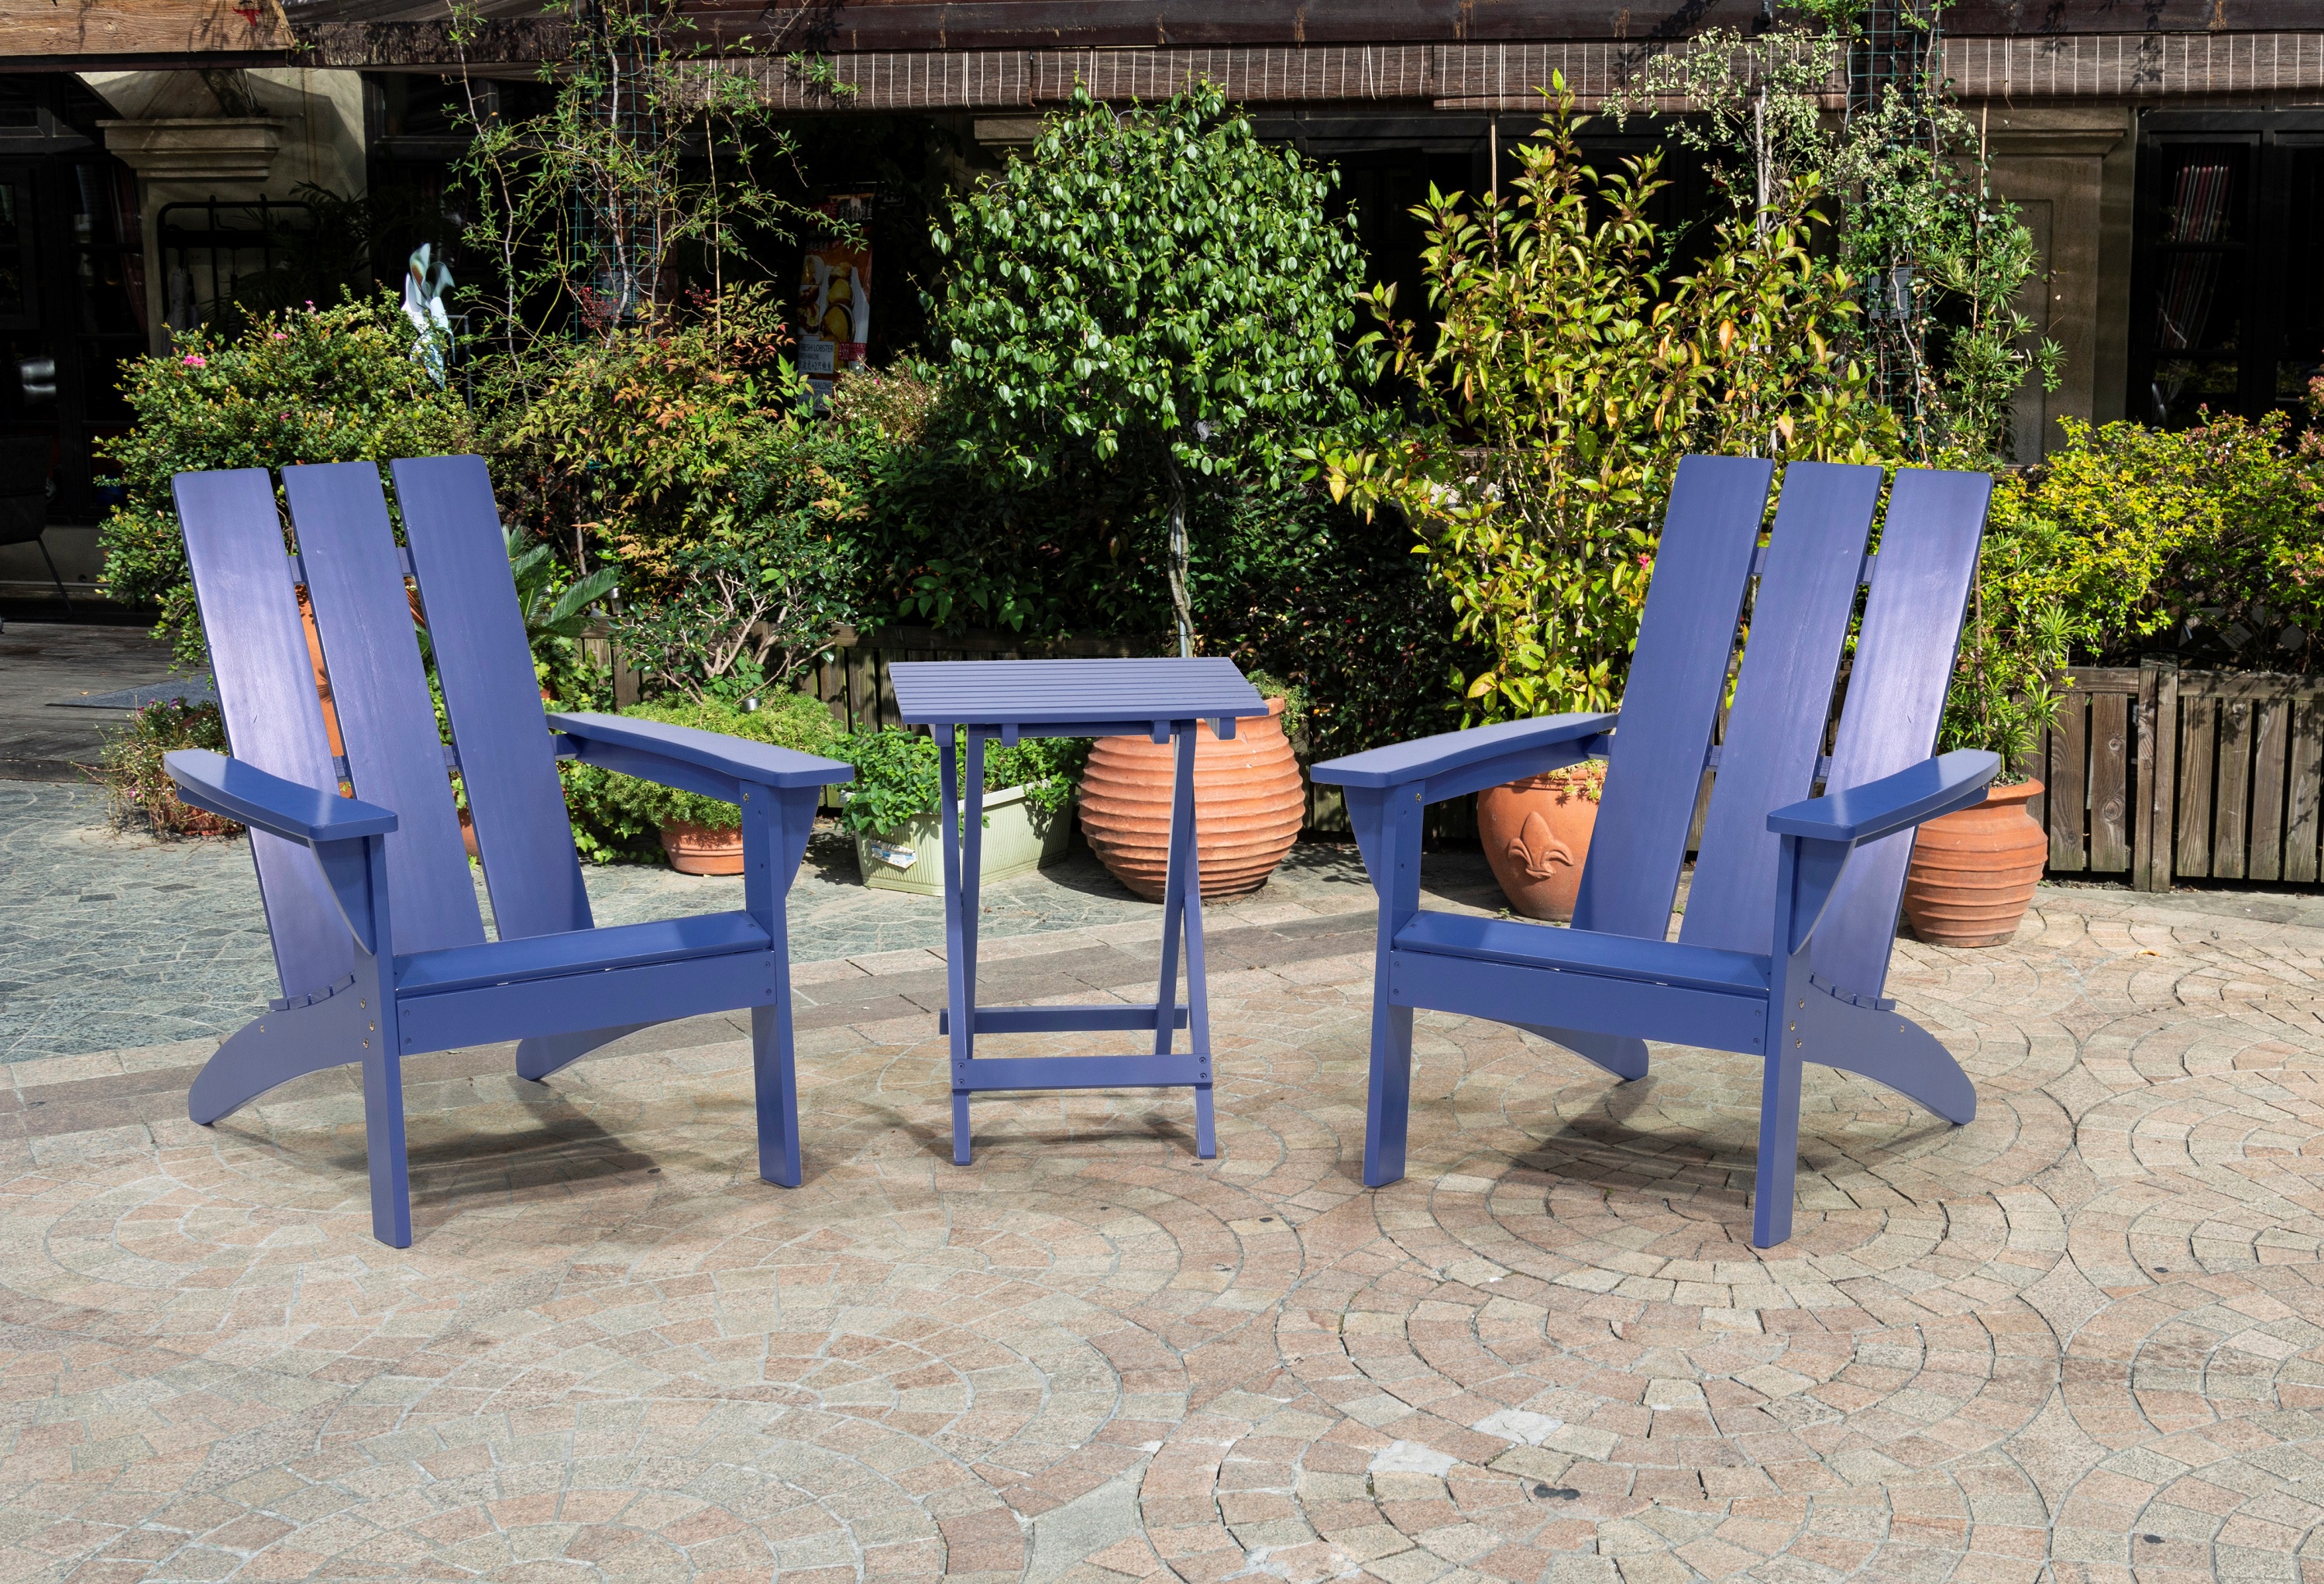 Outdoor Patio Garden Furniture 3-Piece Wood Adirondack Chair Set, Weather Resistant Finish,2 Adirondack Chairs and 1 Side Table-Blue - image 1 of 11